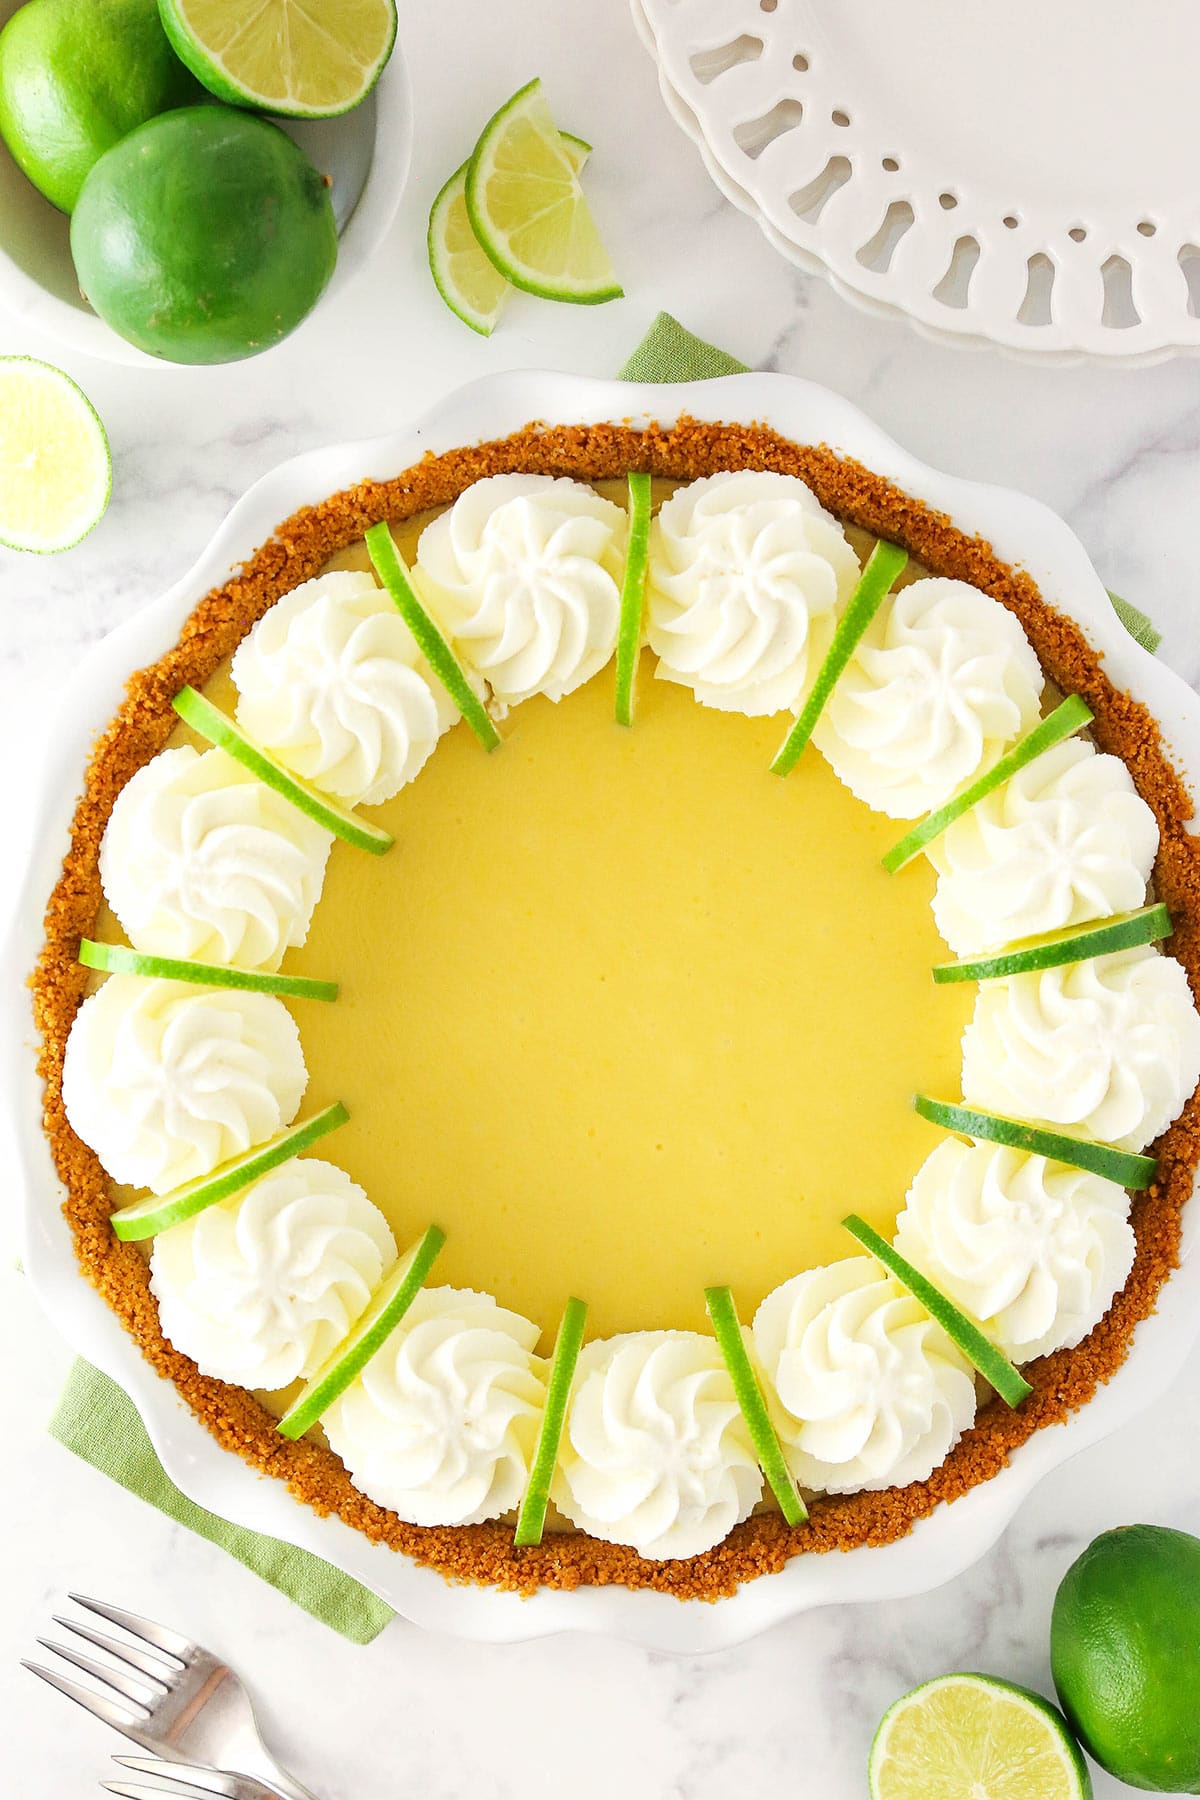 A homemade key lime pie inside of a pie dish with a green kitchen towel underneath the dish and swirls of whipped cream on top of the pie filling